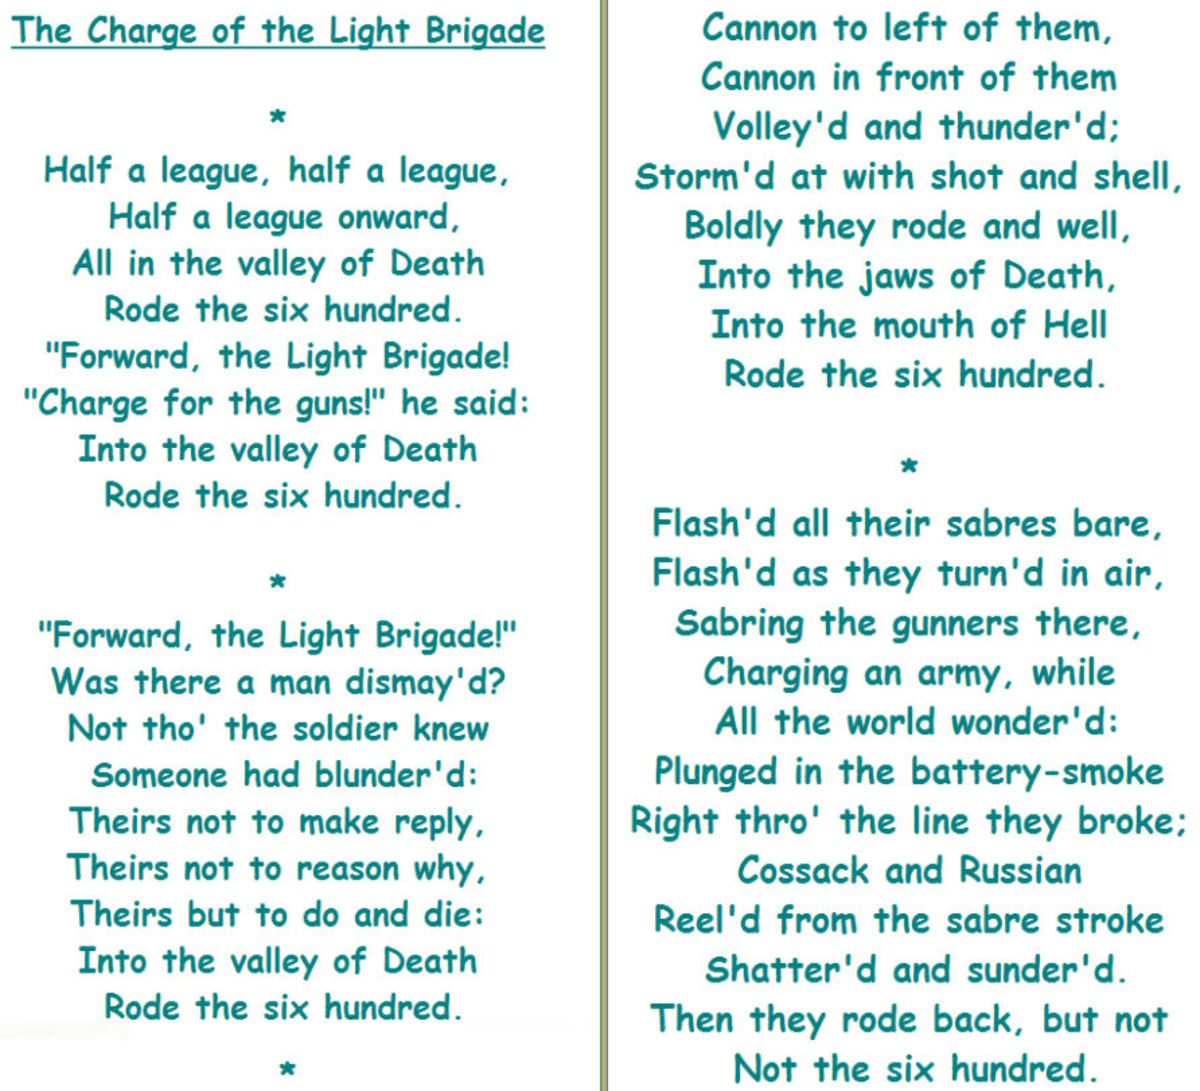 Literary analysis of charge of the light brigade